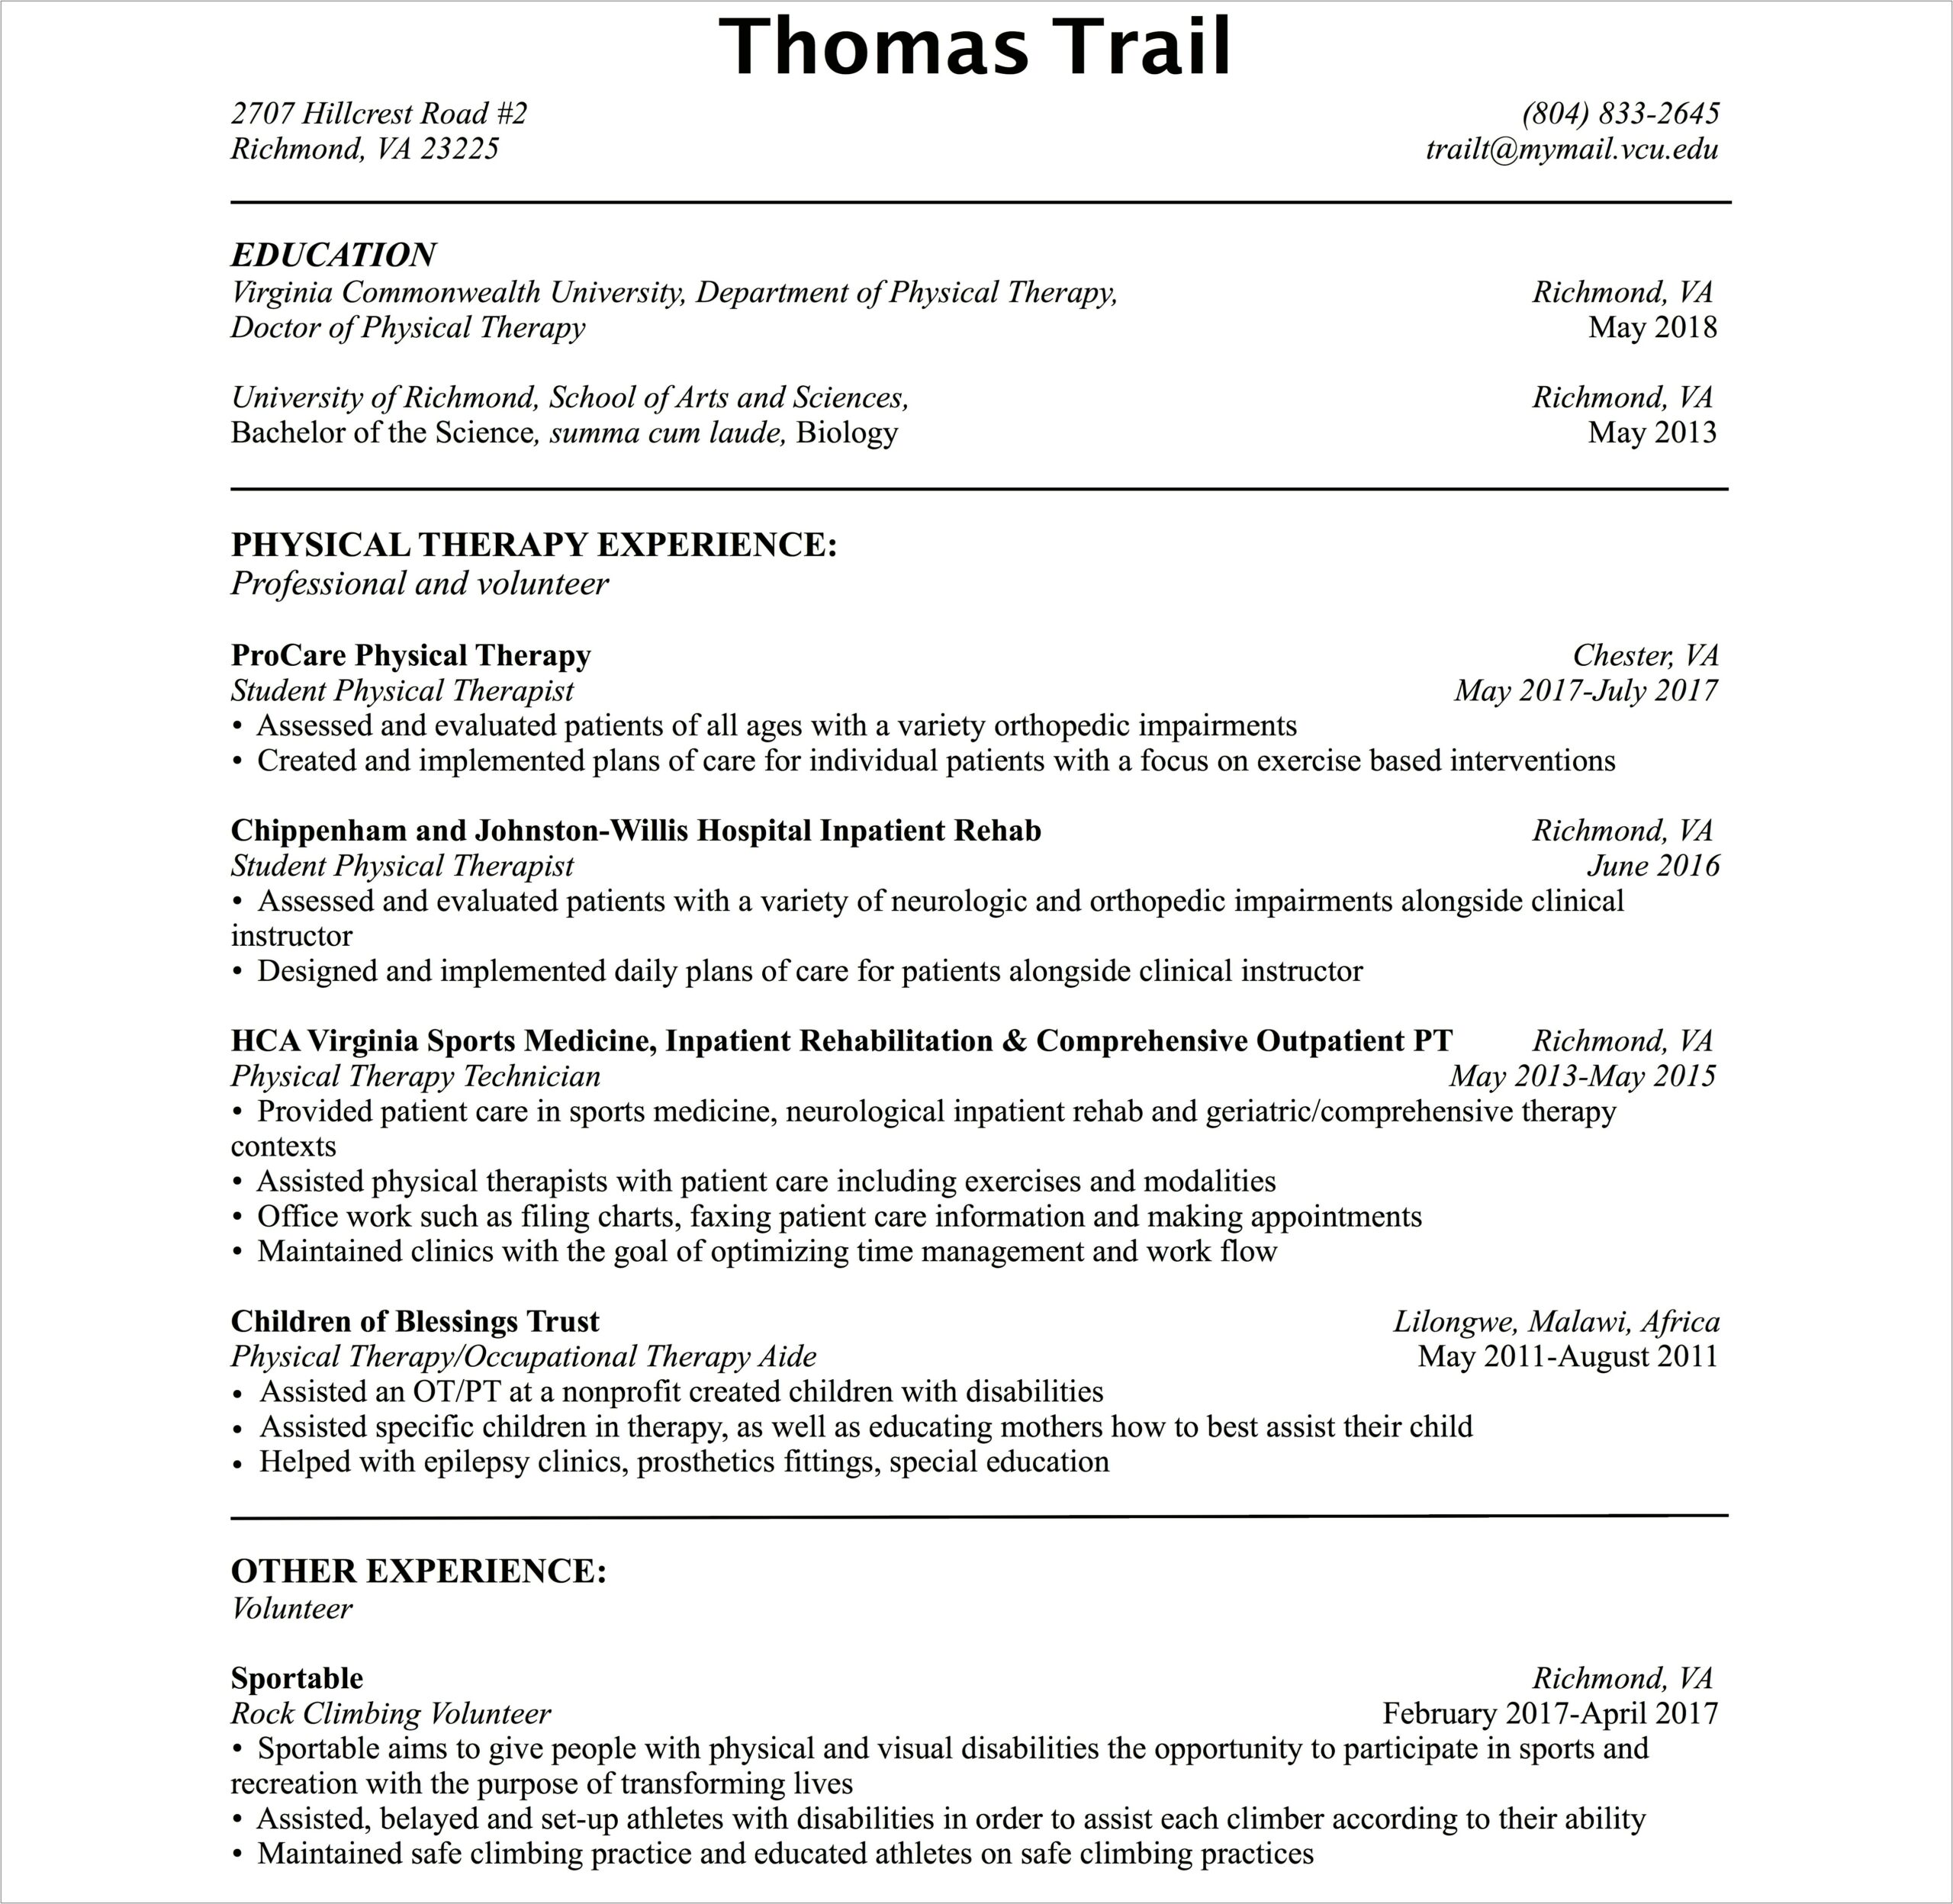 Inpatient Rehab Physical Therapy Description For Resume